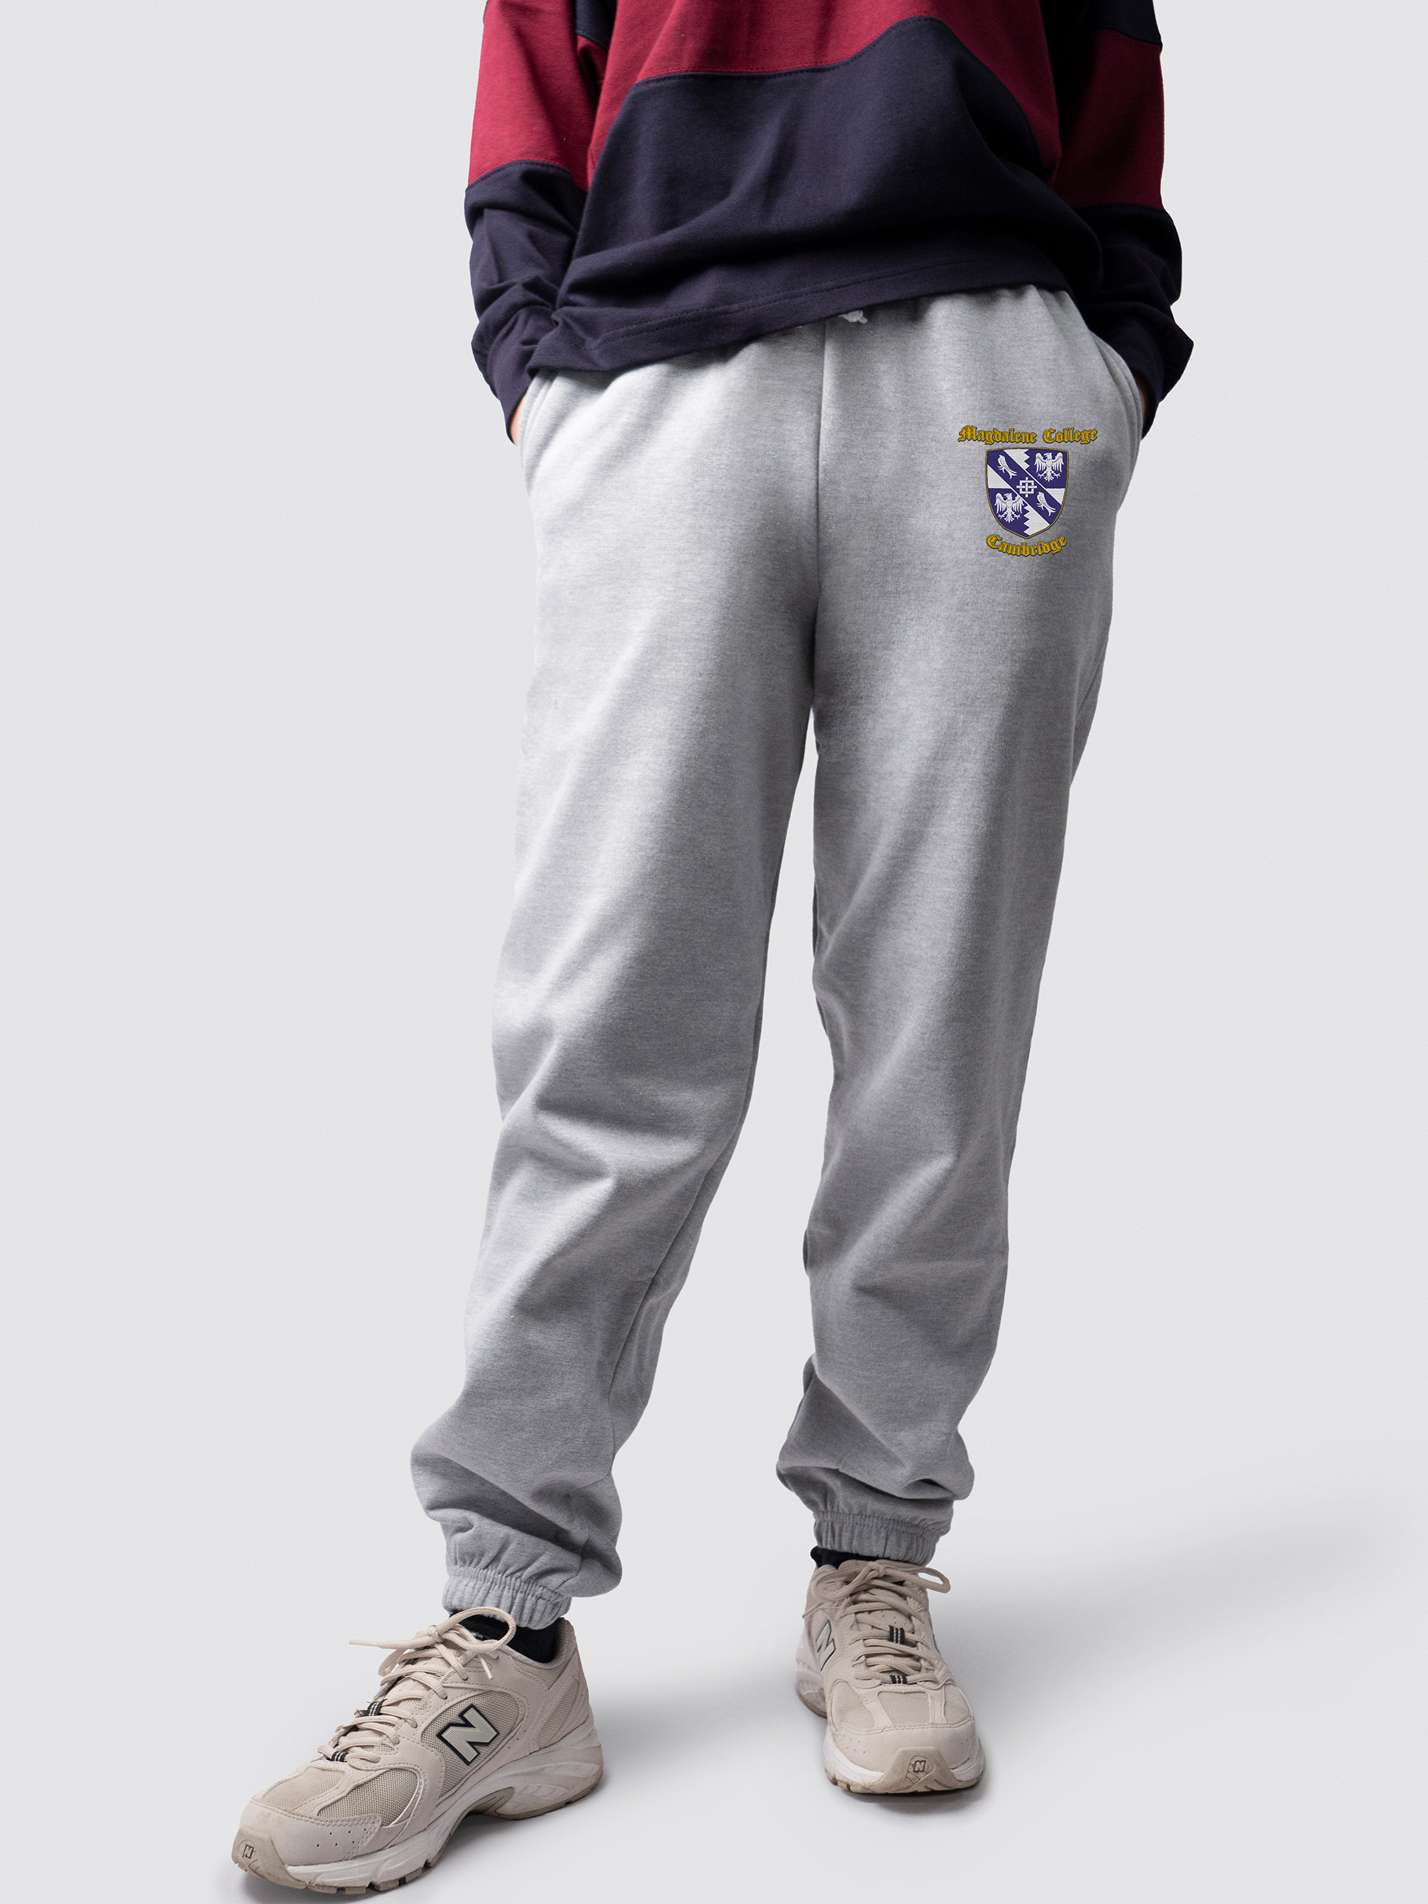 undergraduate cuffed sweatpants, made from soft cotton fabric, with Magdalene logo